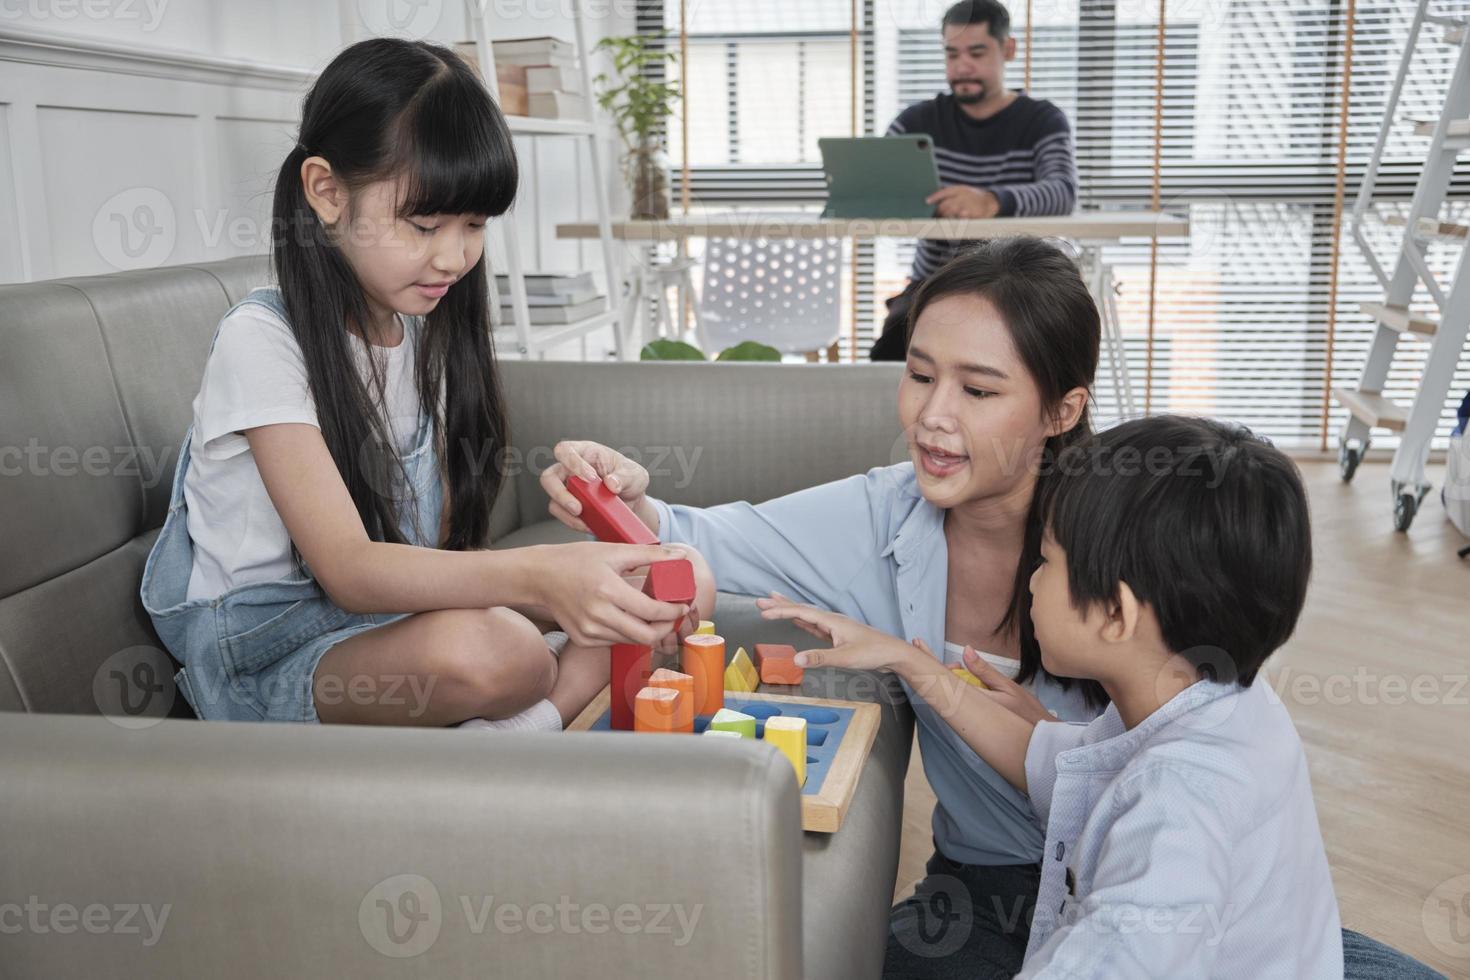 Happy Asian Thai family care, mum and little children have fun playing with colorful toy blocks together on sofa in white living room while dad works, leisure weekend and domestic wellbeing lifestyle. photo